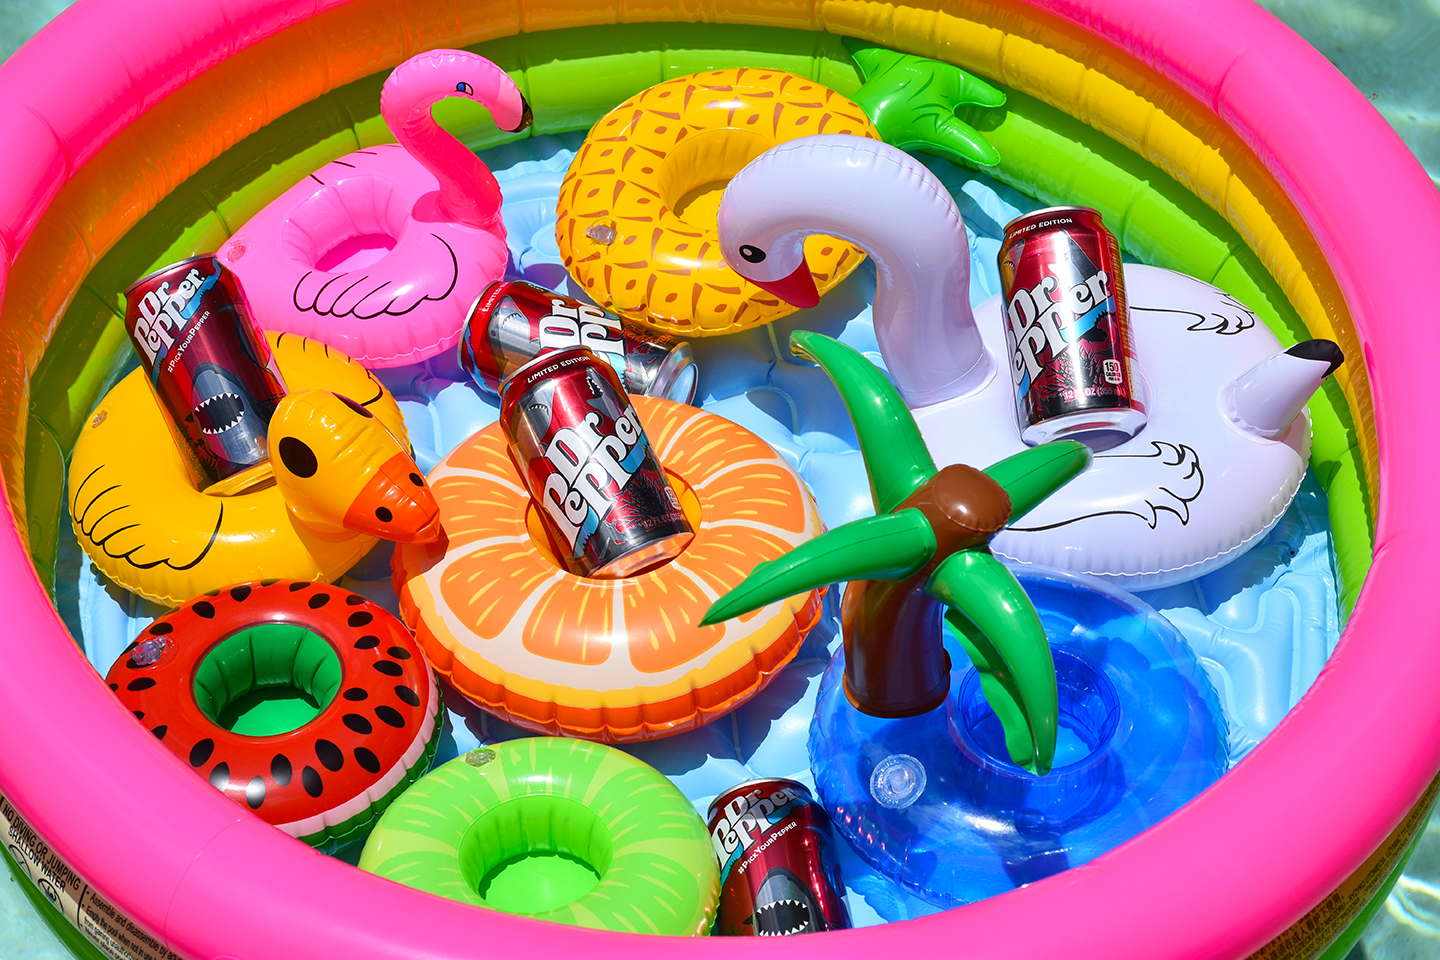 Pool Party Inspiration, Pool party ideas for adults, backyard pool party ideas for adults, pool party for adults ideas